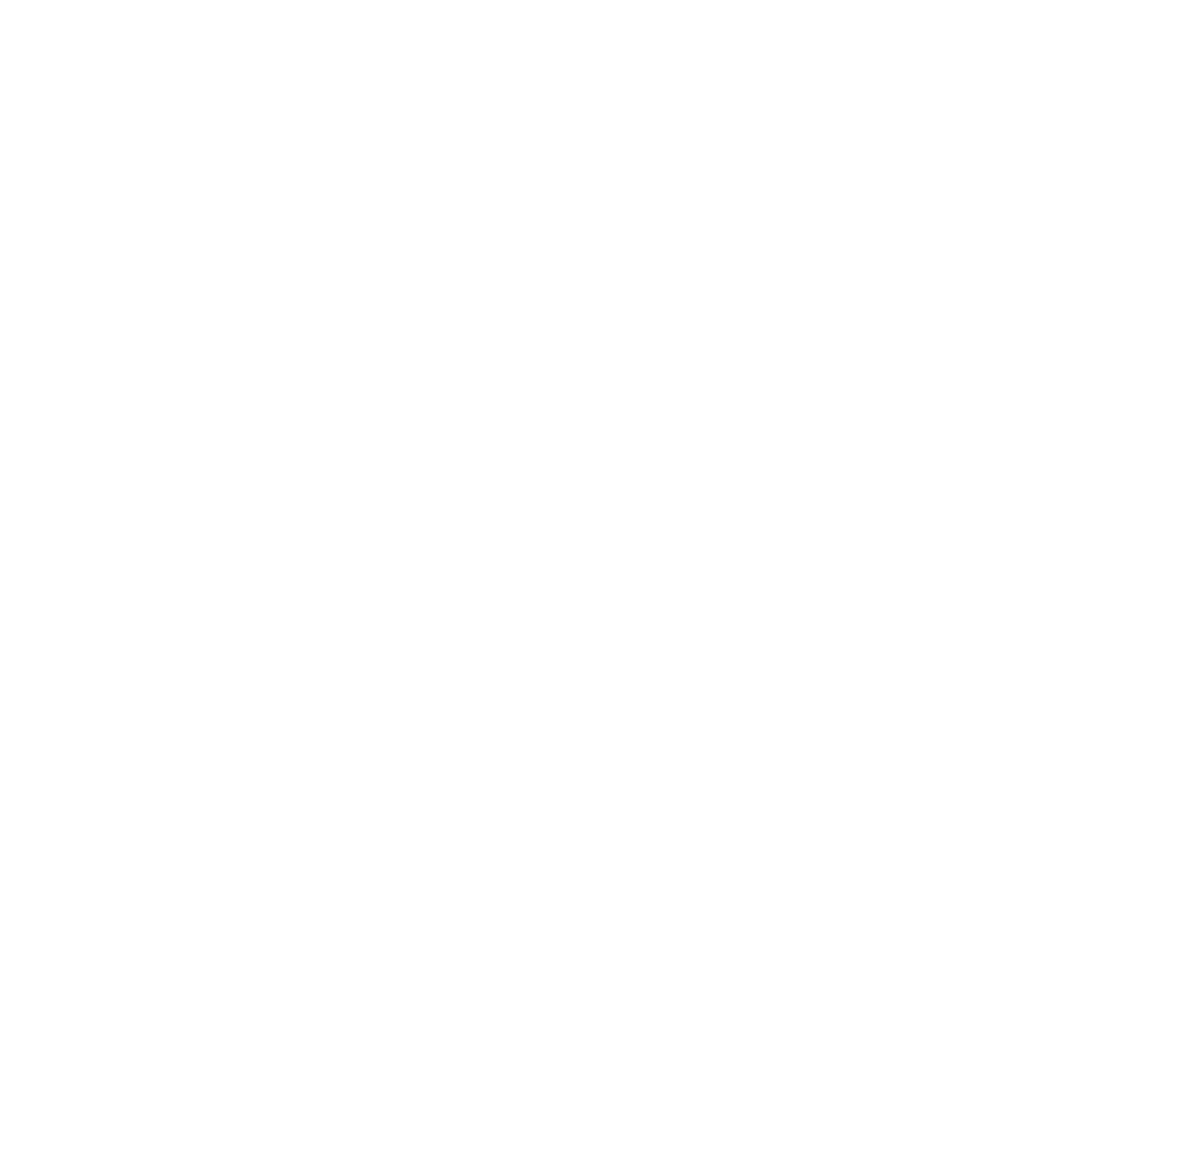 Directors_Guild_of_AmericaWHITE.png